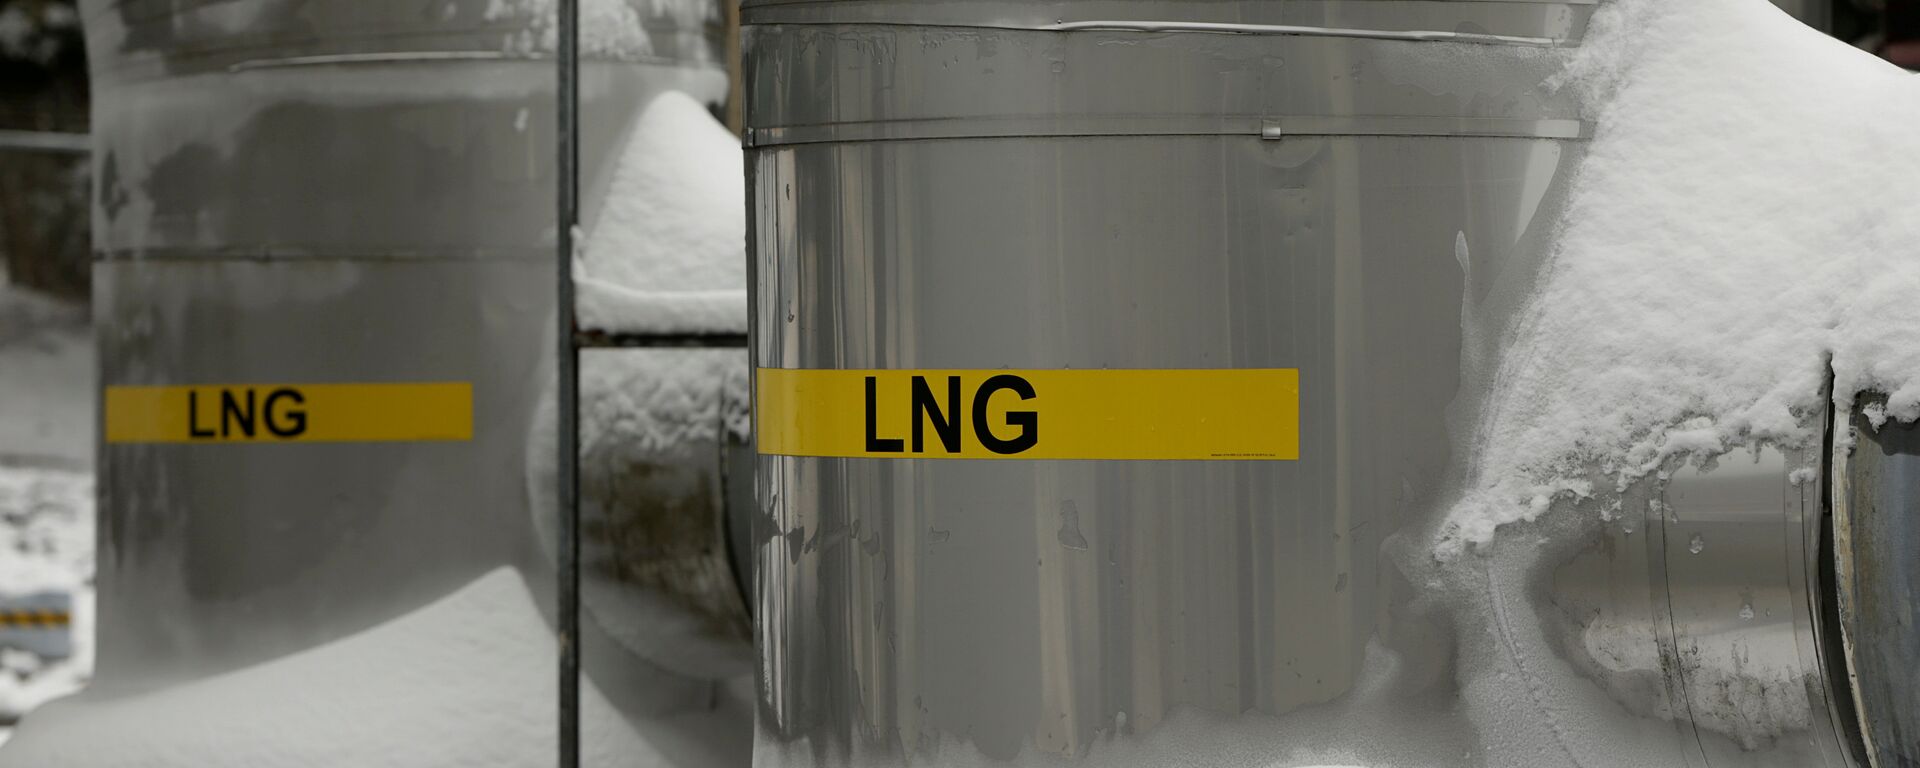 FILE PHOTO: Snow covered transfer lines are seen at the Dominion Cove Point Liquefied Natural Gas (LNG) terminal in Lusby, Maryland March 18, 2014. - Sputnik International, 1920, 27.02.2022